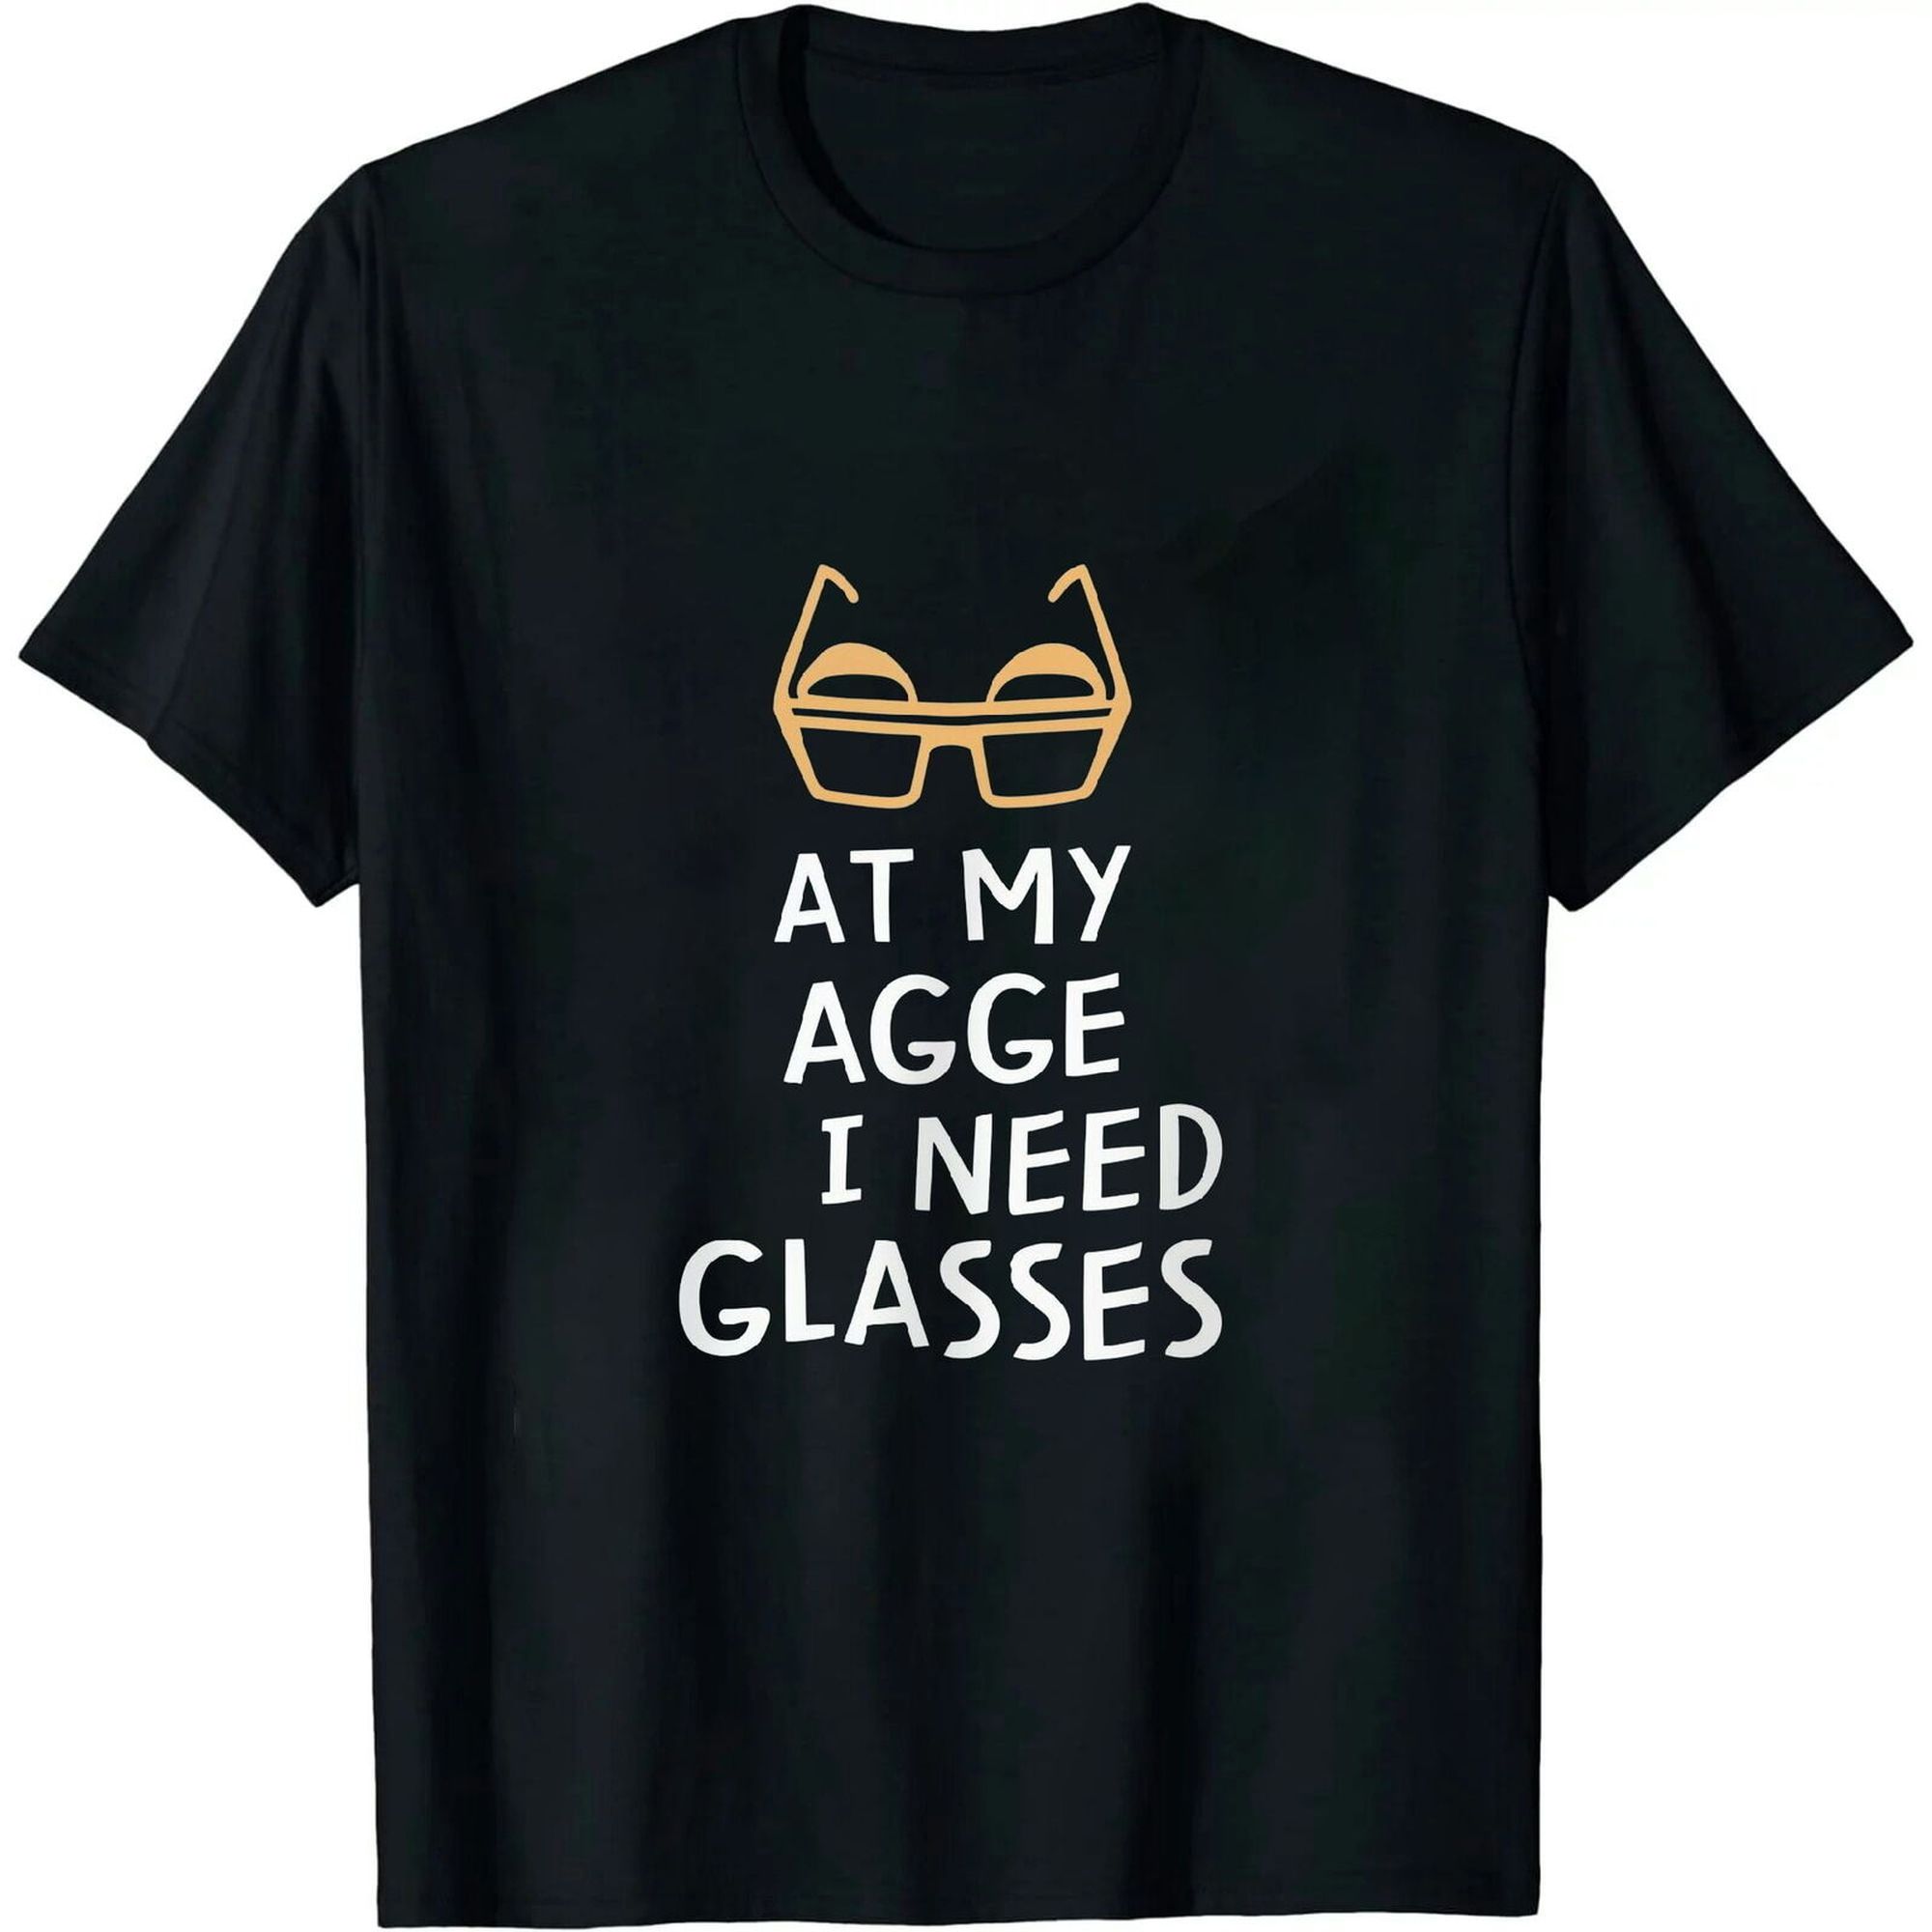 Sip in Style with a Twist of Humor: Hilarious Glassware Enthusiast Tee ...